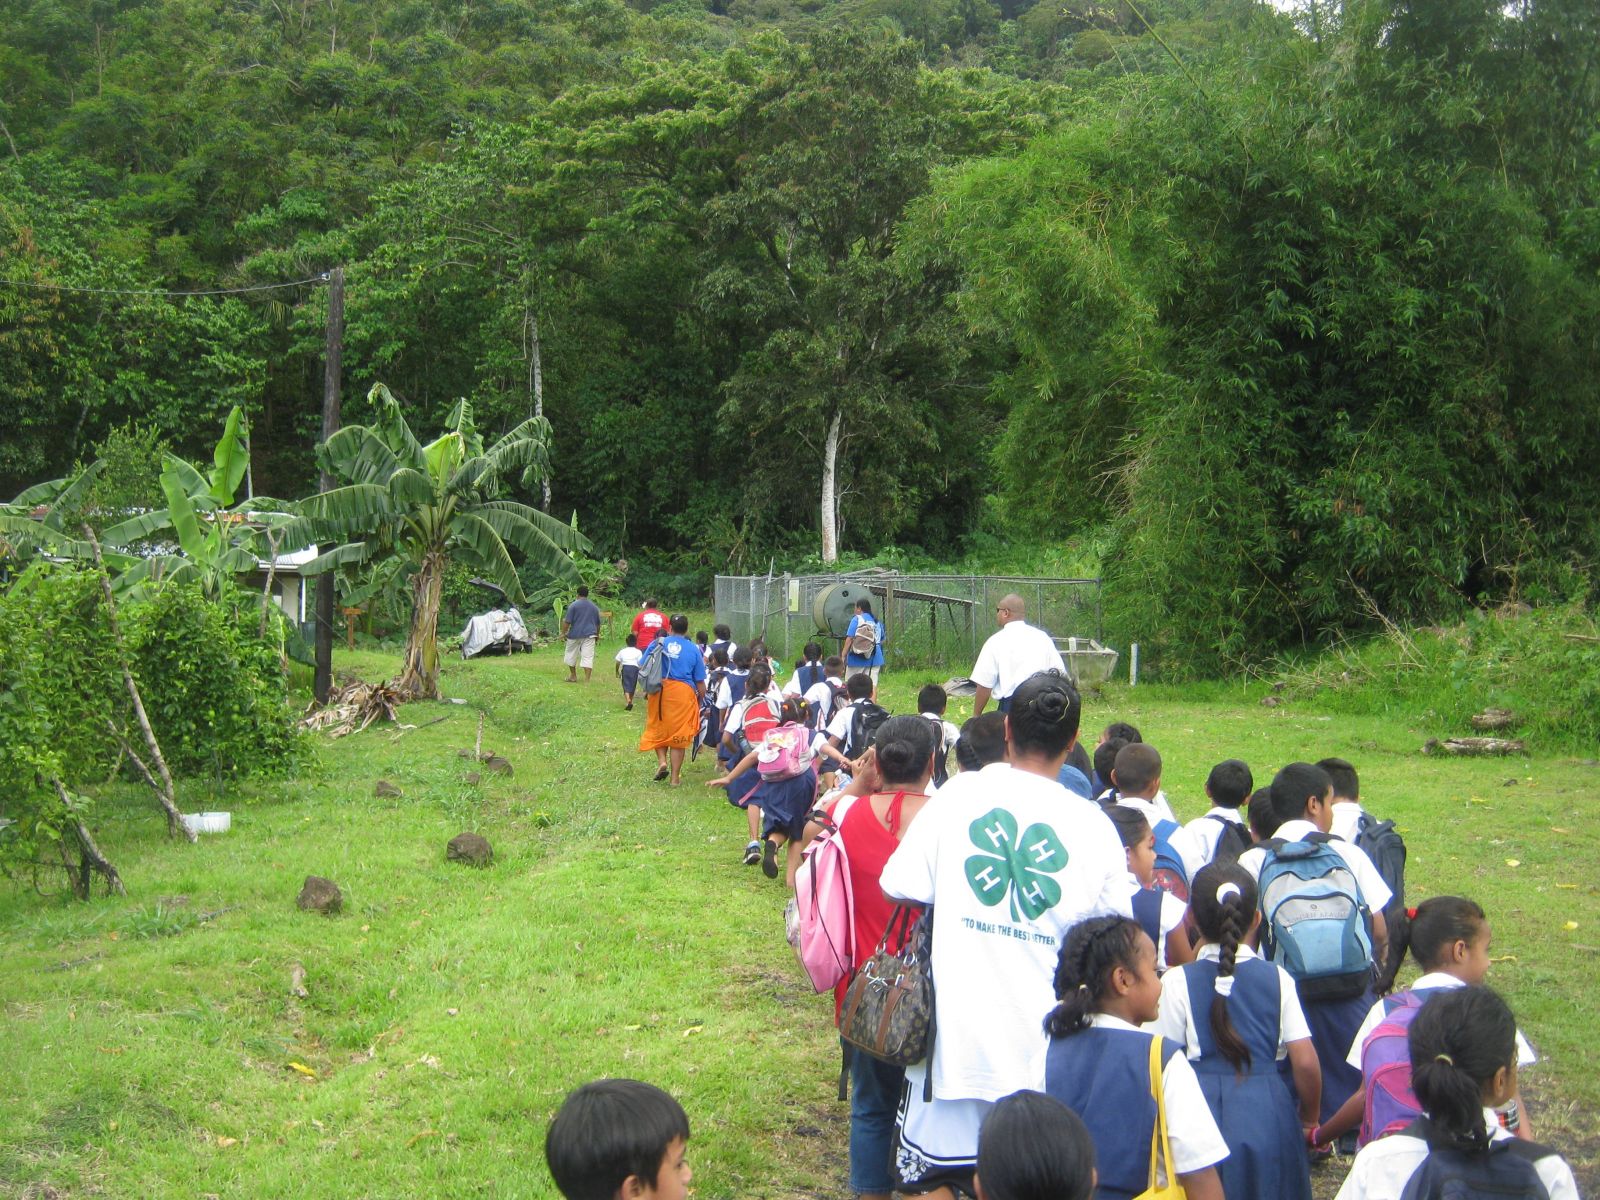 Field visits and greenhouse tours from schools and conservation education conducted by the U&CF program and Forestry Staff in American Samoa.